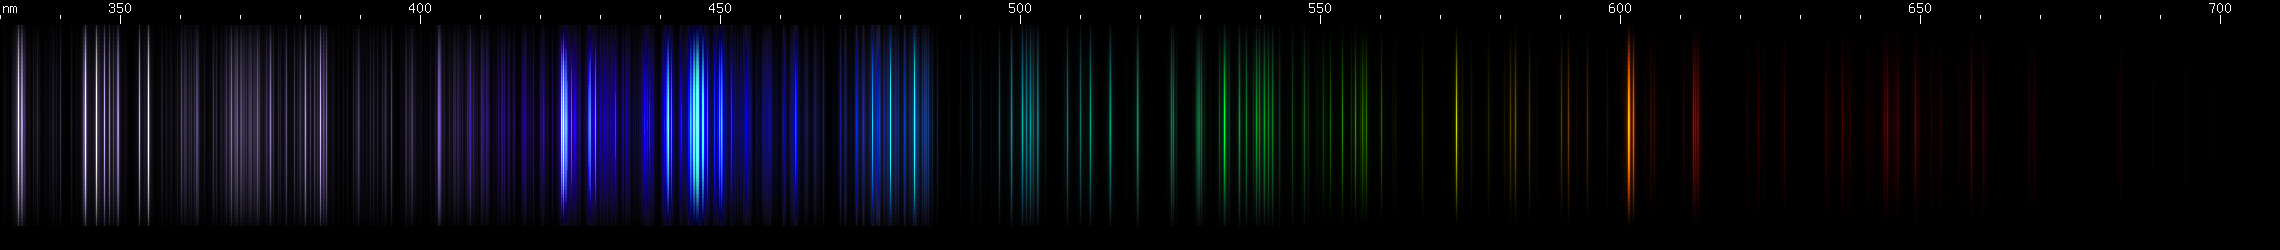 Spectral lines of Manganese.